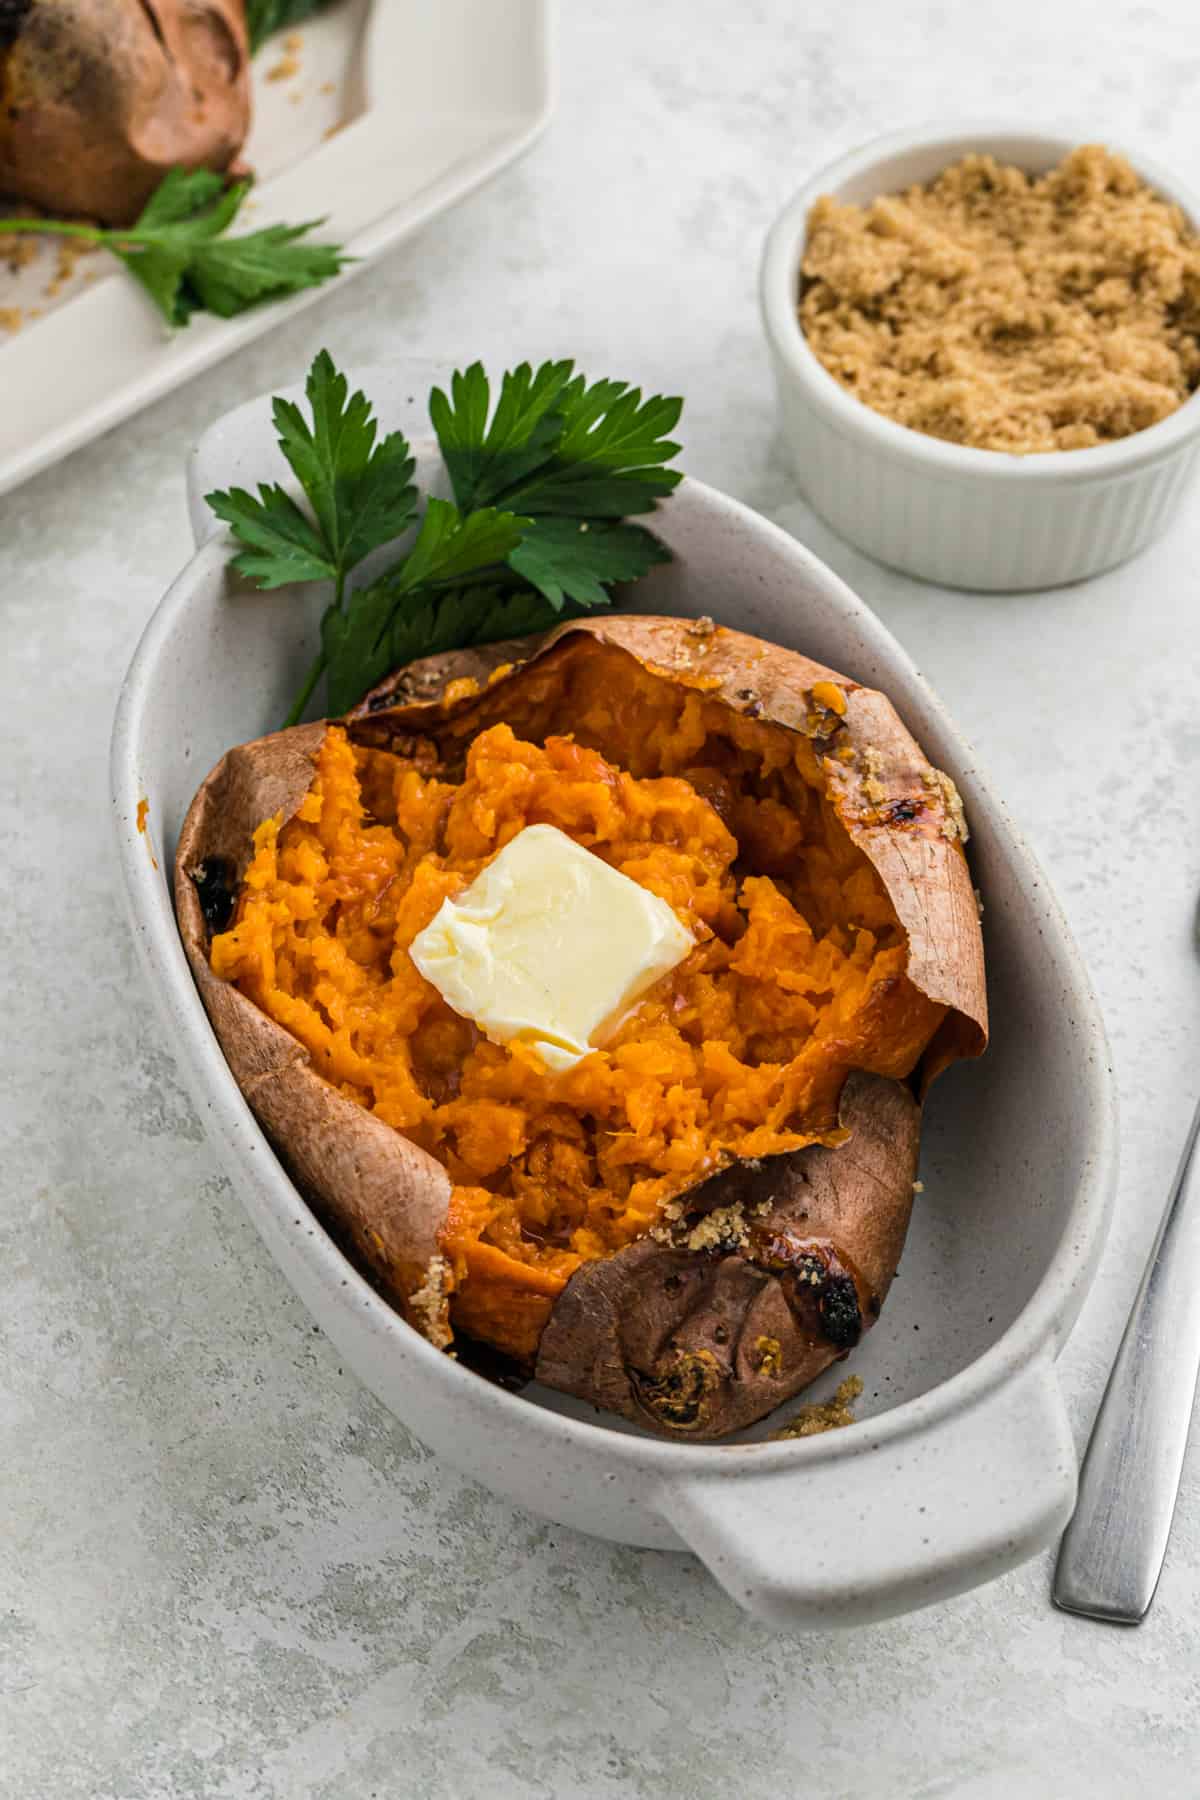 A large baked sweet potato in a white baking dish.